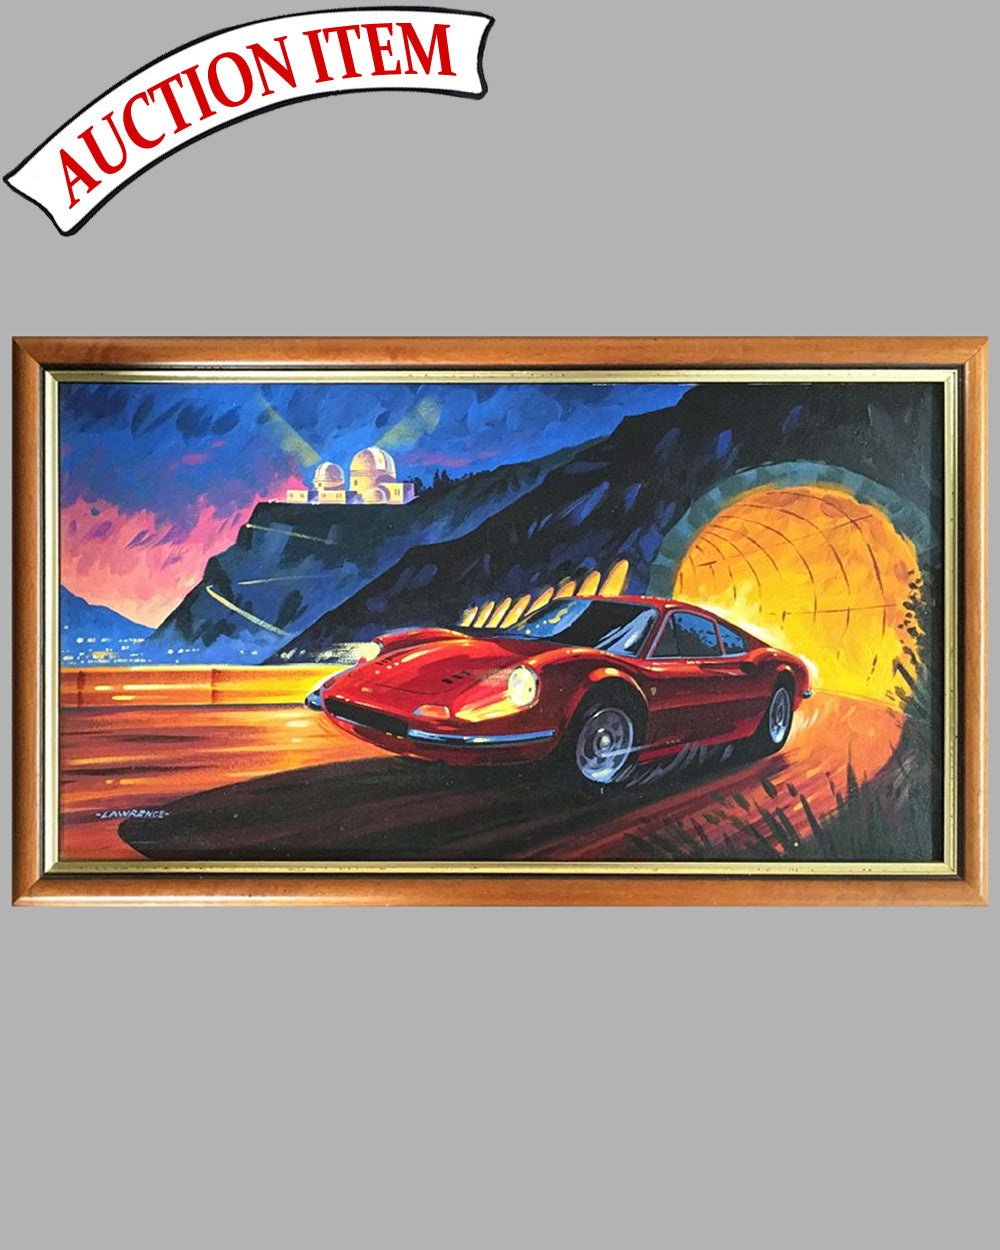 15 - Fire in the Sky Ferrari 246 Dino Coupe painting by Joe Lawrence, U.K.